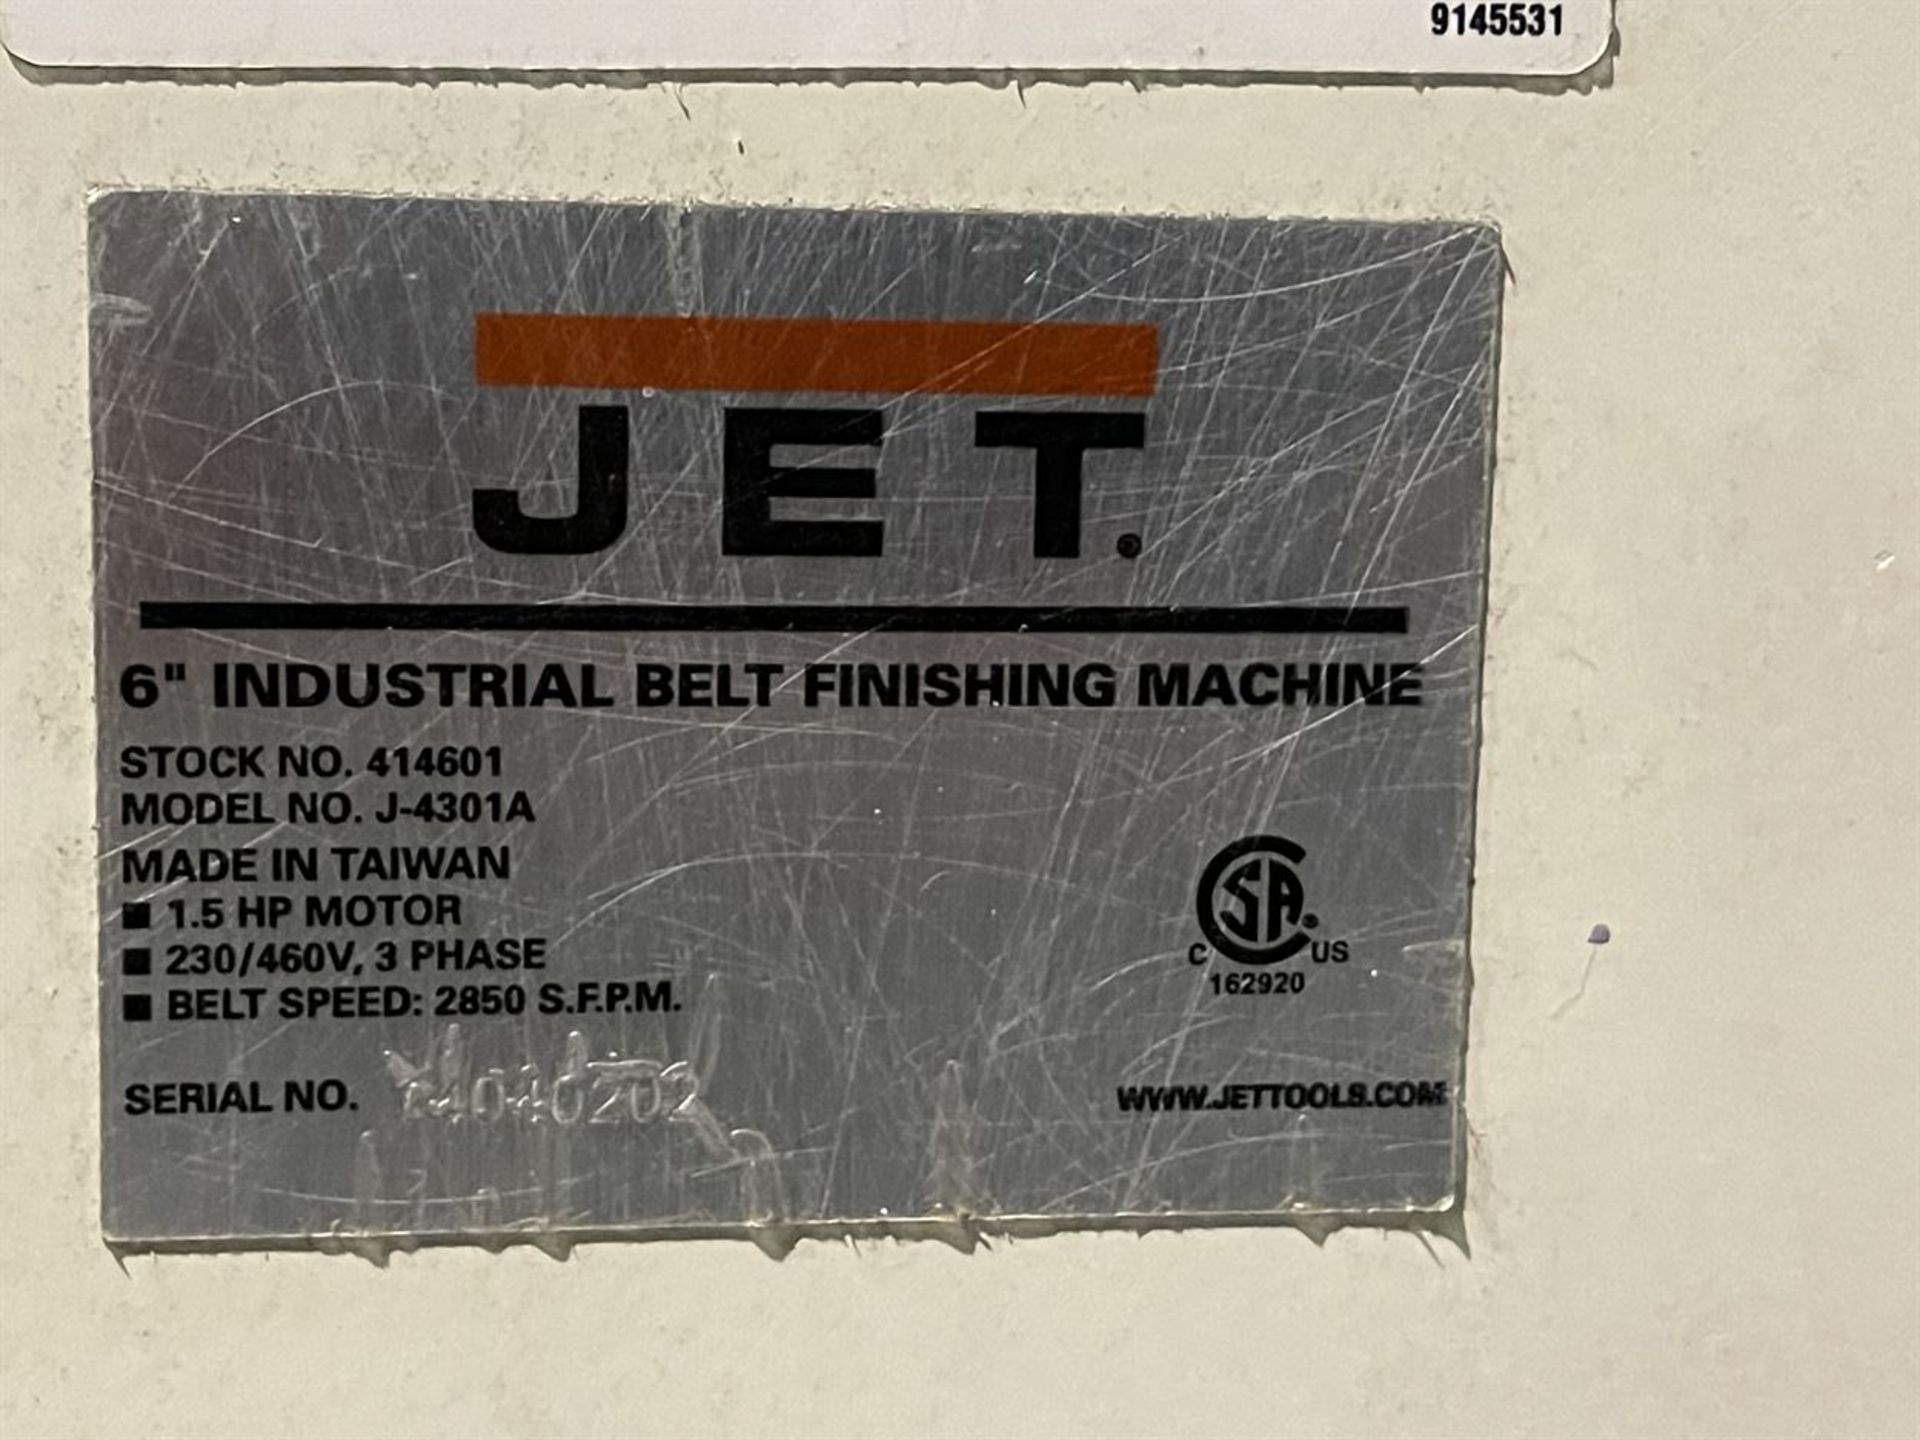 JET J-4301A 6" Belt Finishing Machine (Note: This item was not owned or related to the Pamarco - Image 3 of 3